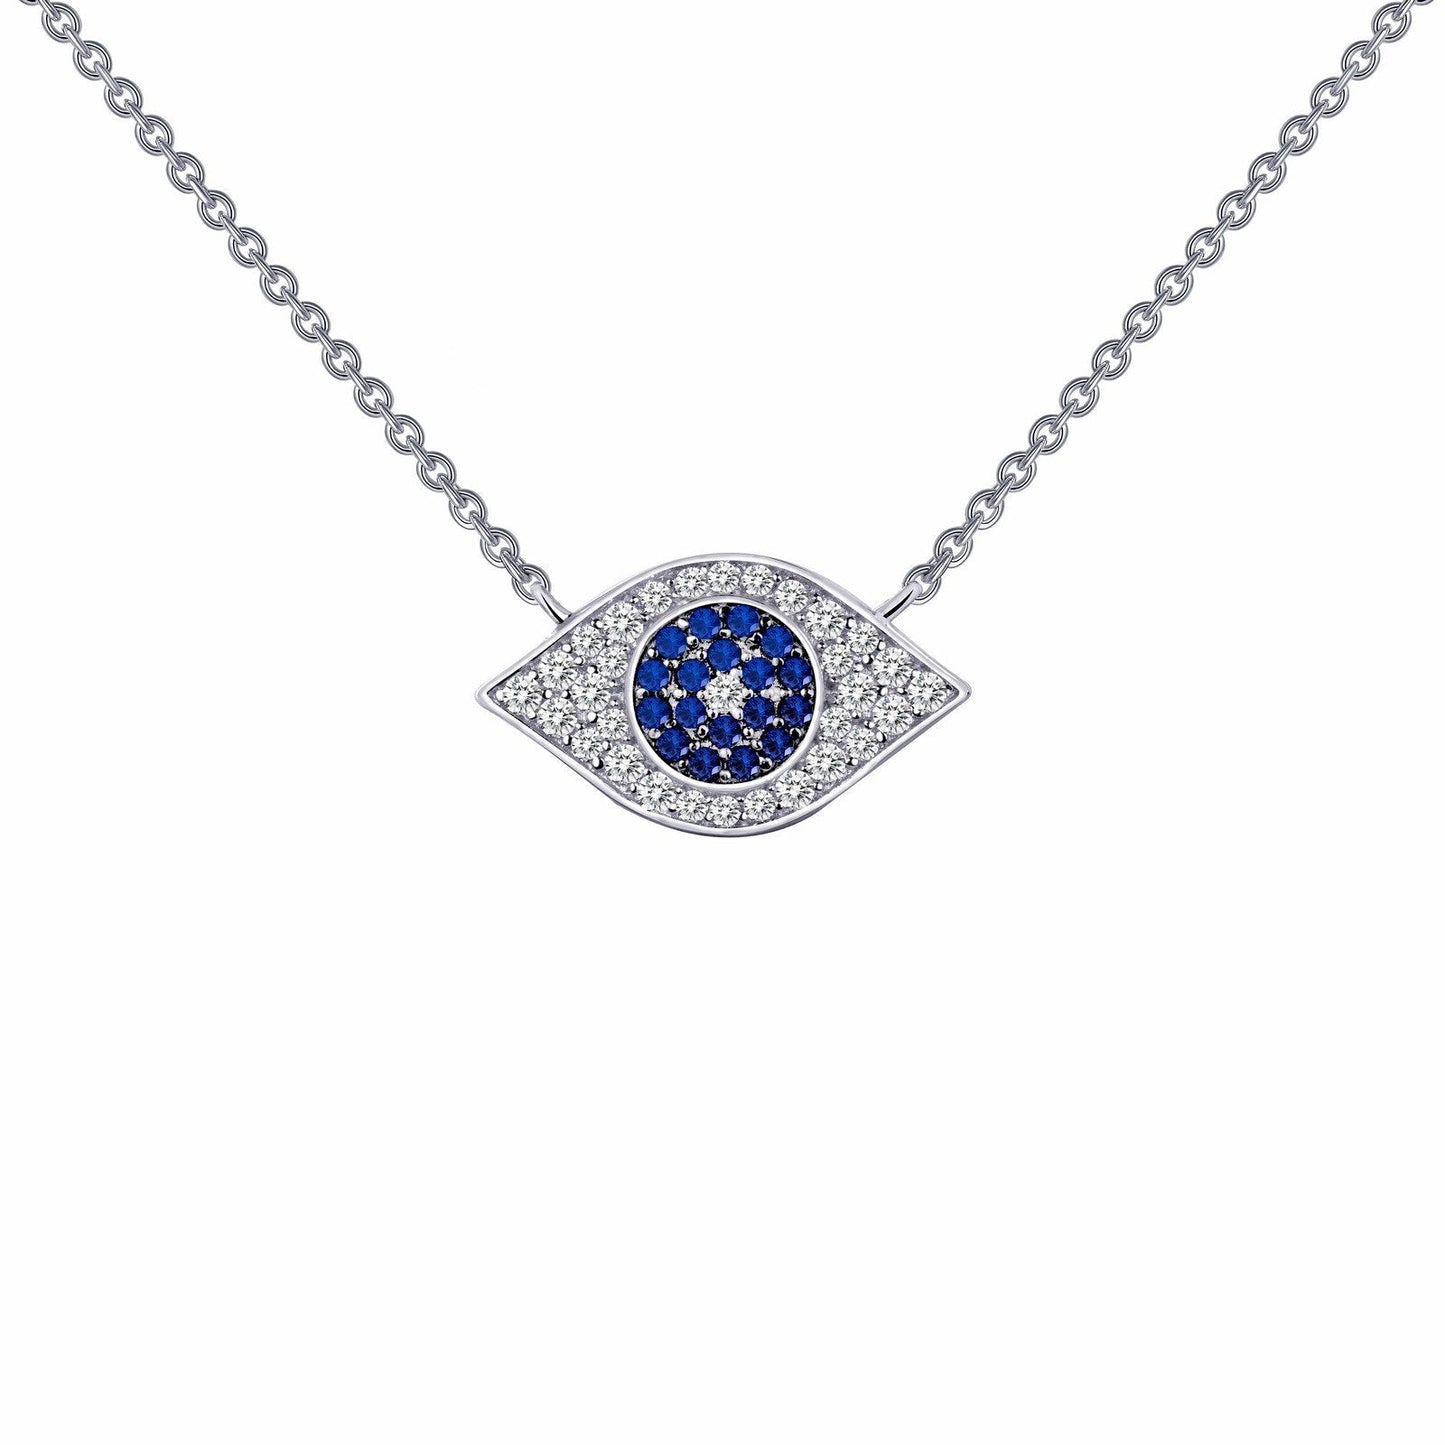 Load image into Gallery viewer, LaFonn Platinum Sapphire N/A NECKLACES 0.46 CTW Evil Eye Necklace
